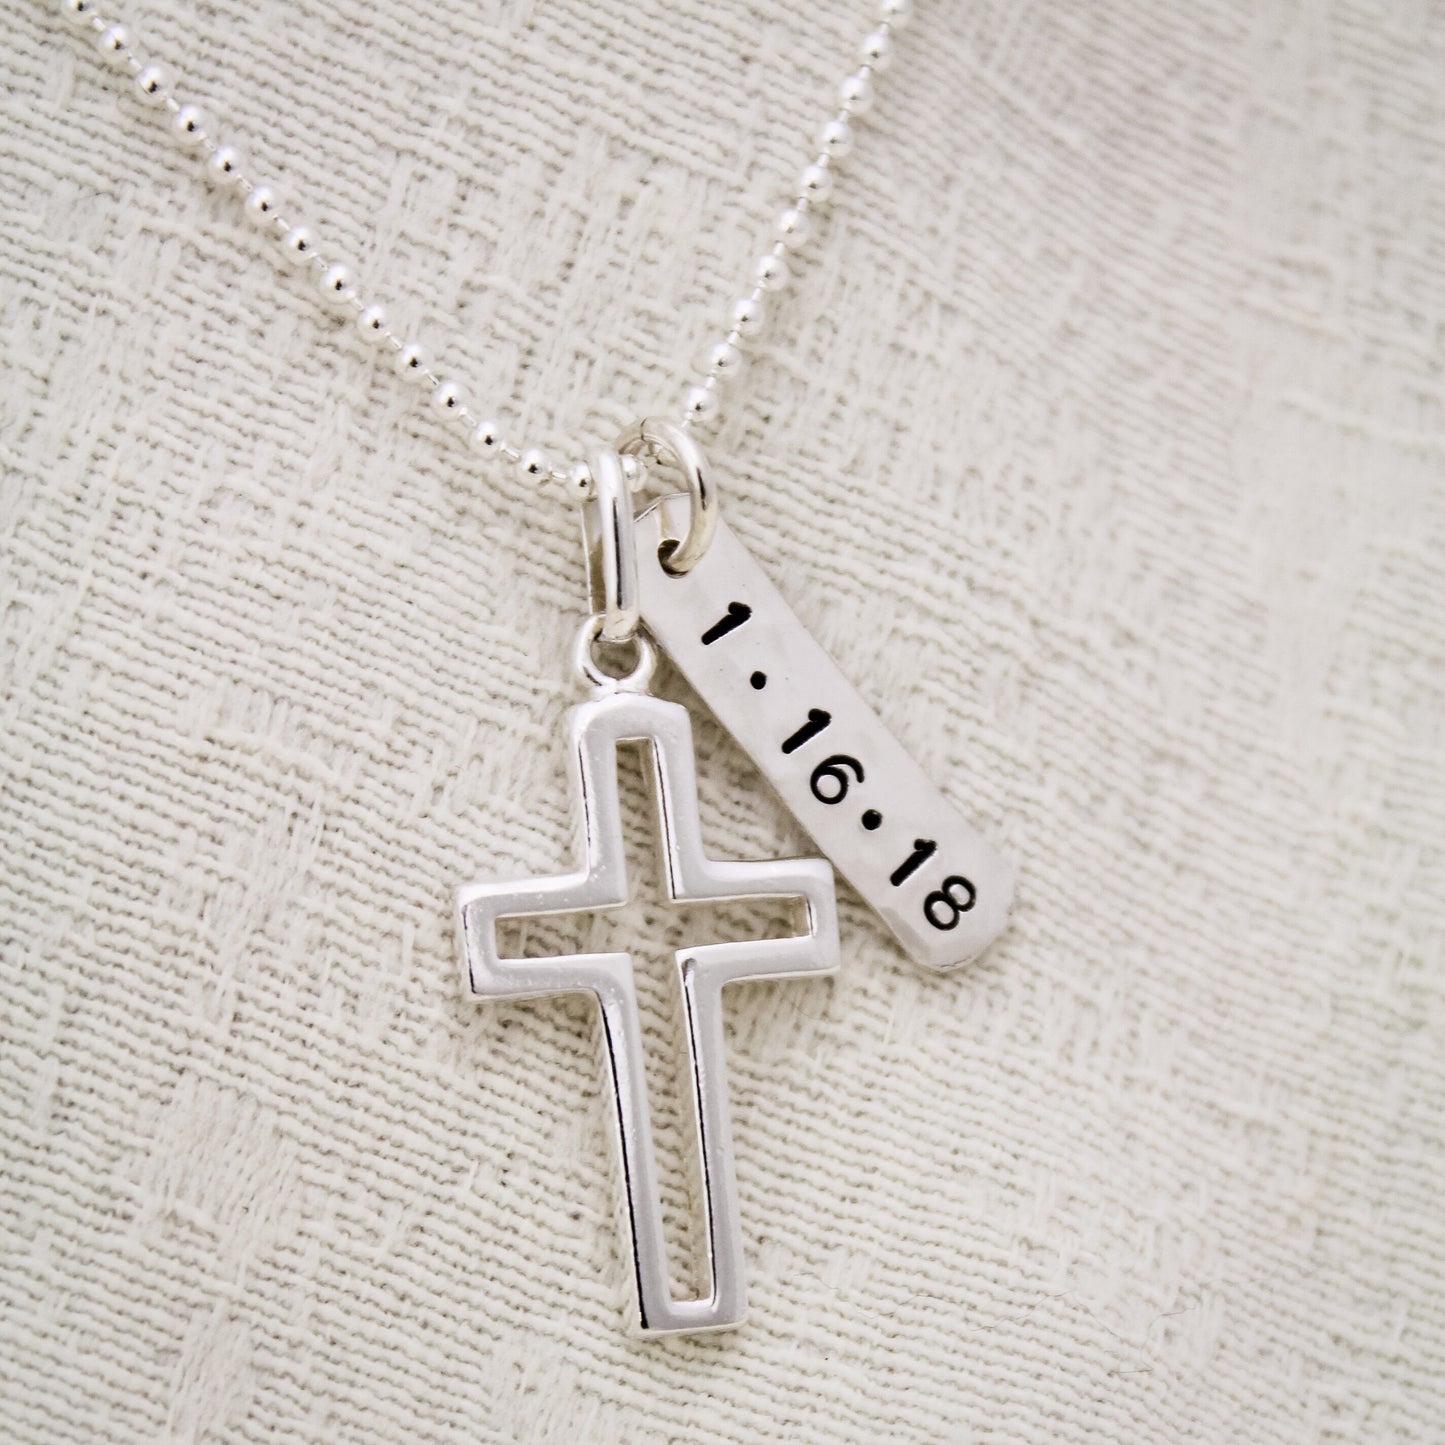 Personalized Boys Cross Necklace, Boys Confirmation or First Communion Gift, Silver Cross with Date Necklace for Boys, Hand Stamped